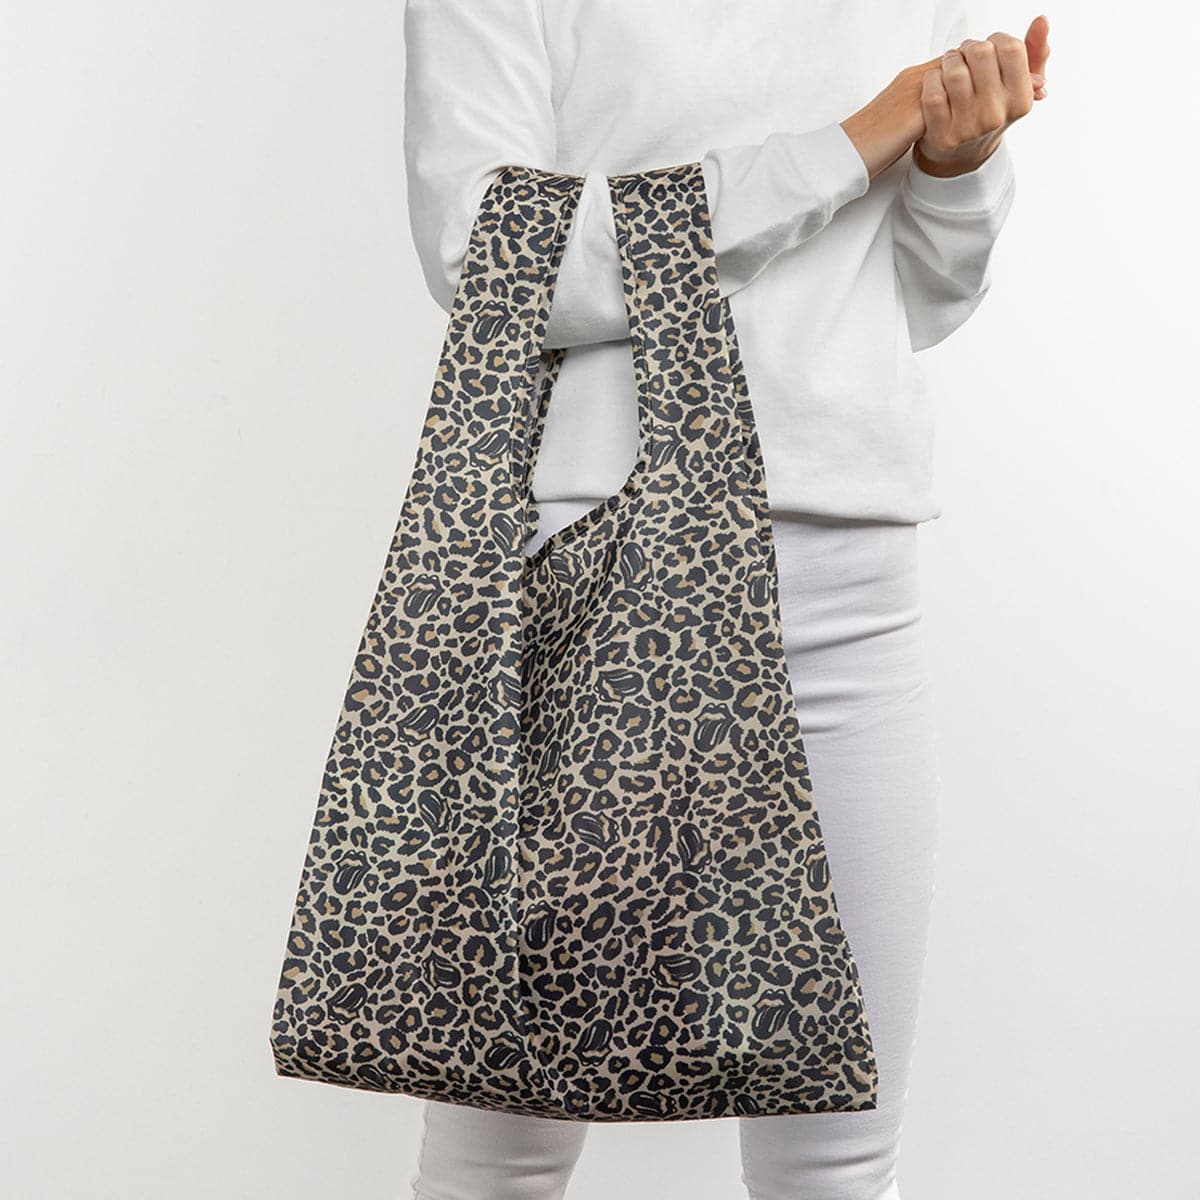 The Rolling Stones The Paddington Packable Tote Bag